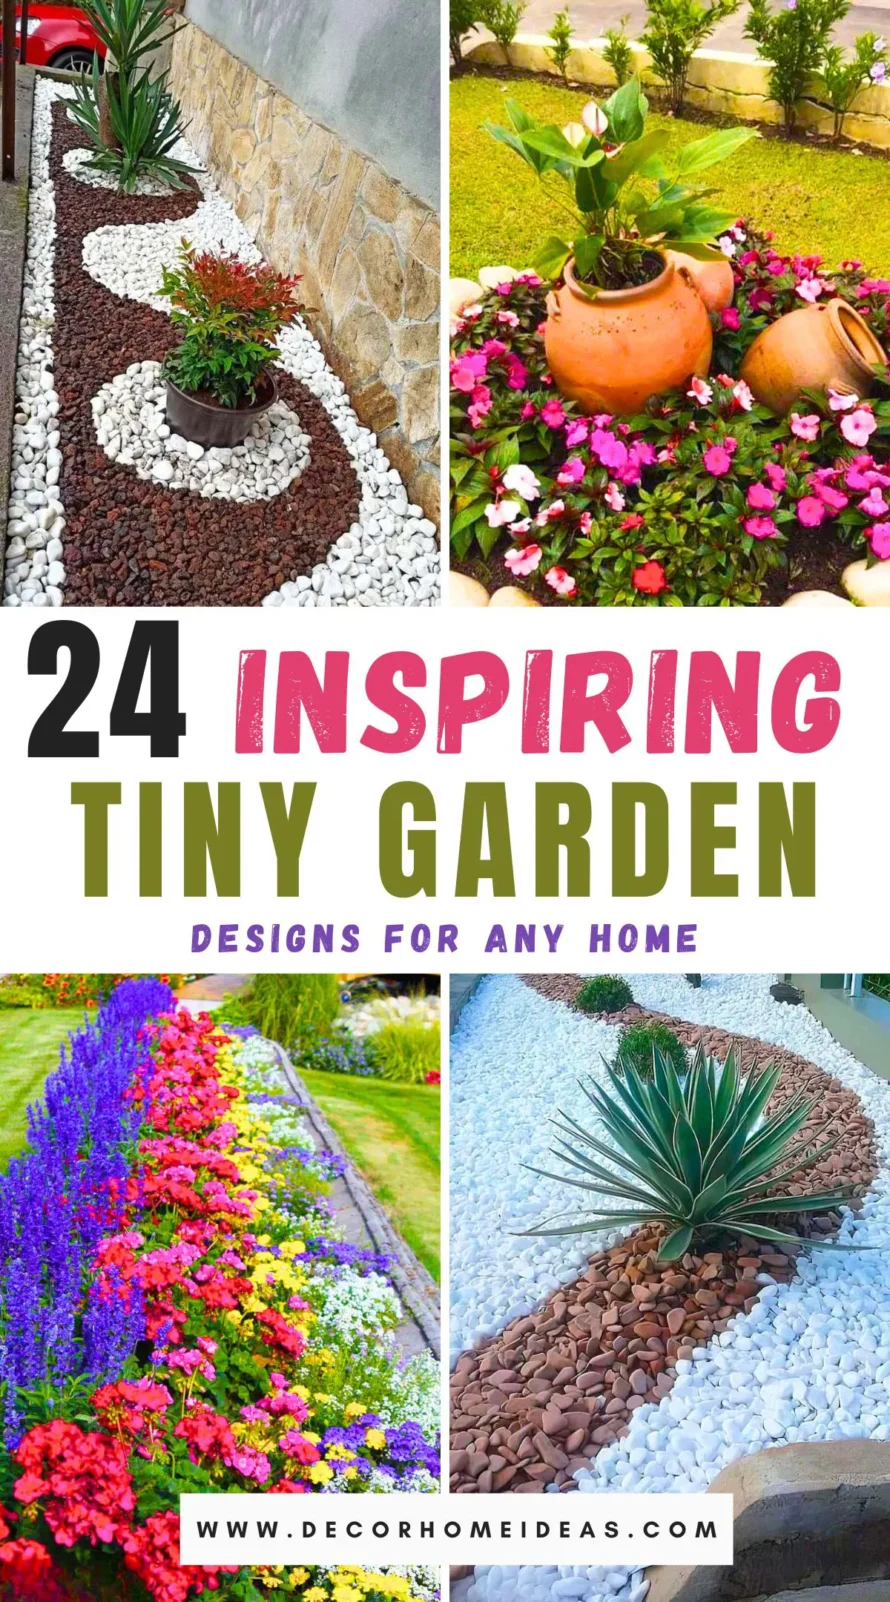 Explore 24 enchanting tiny garden designs tailored for compact spaces. From vertical gardens to rooftop oases, these creative ideas maximize every inch of space, offering a lush and inviting retreat in even the smallest of areas. Whether you have a balcony, patio, or windowsill, transform your space into a verdant sanctuary with these inspiring garden concepts.